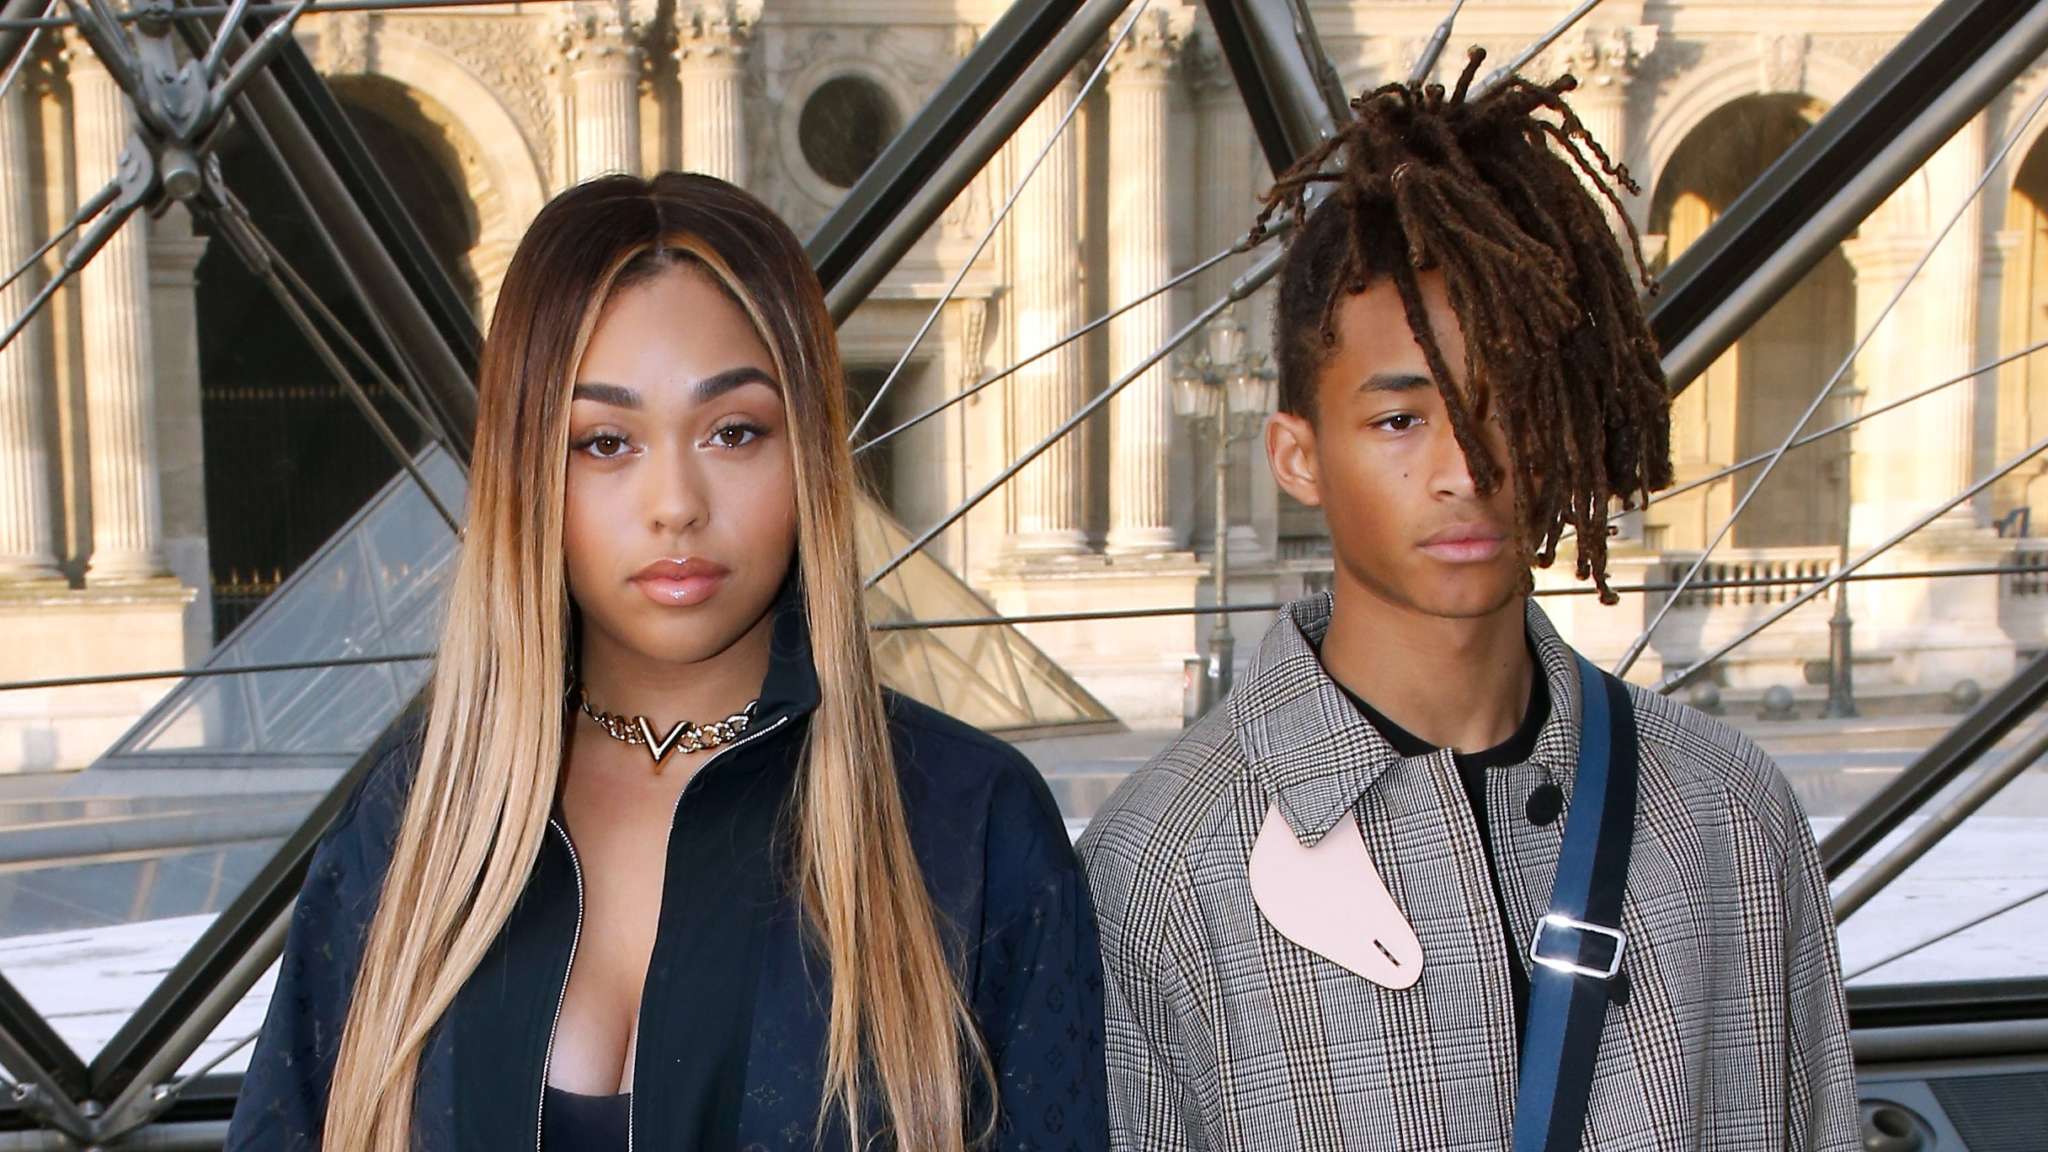 Jordyn Woods Celebrates Her BFF's Jaden Smith's Birthday With His Family - Fans Highlight An Important Issue Regarding Kardashian-Related Rumors